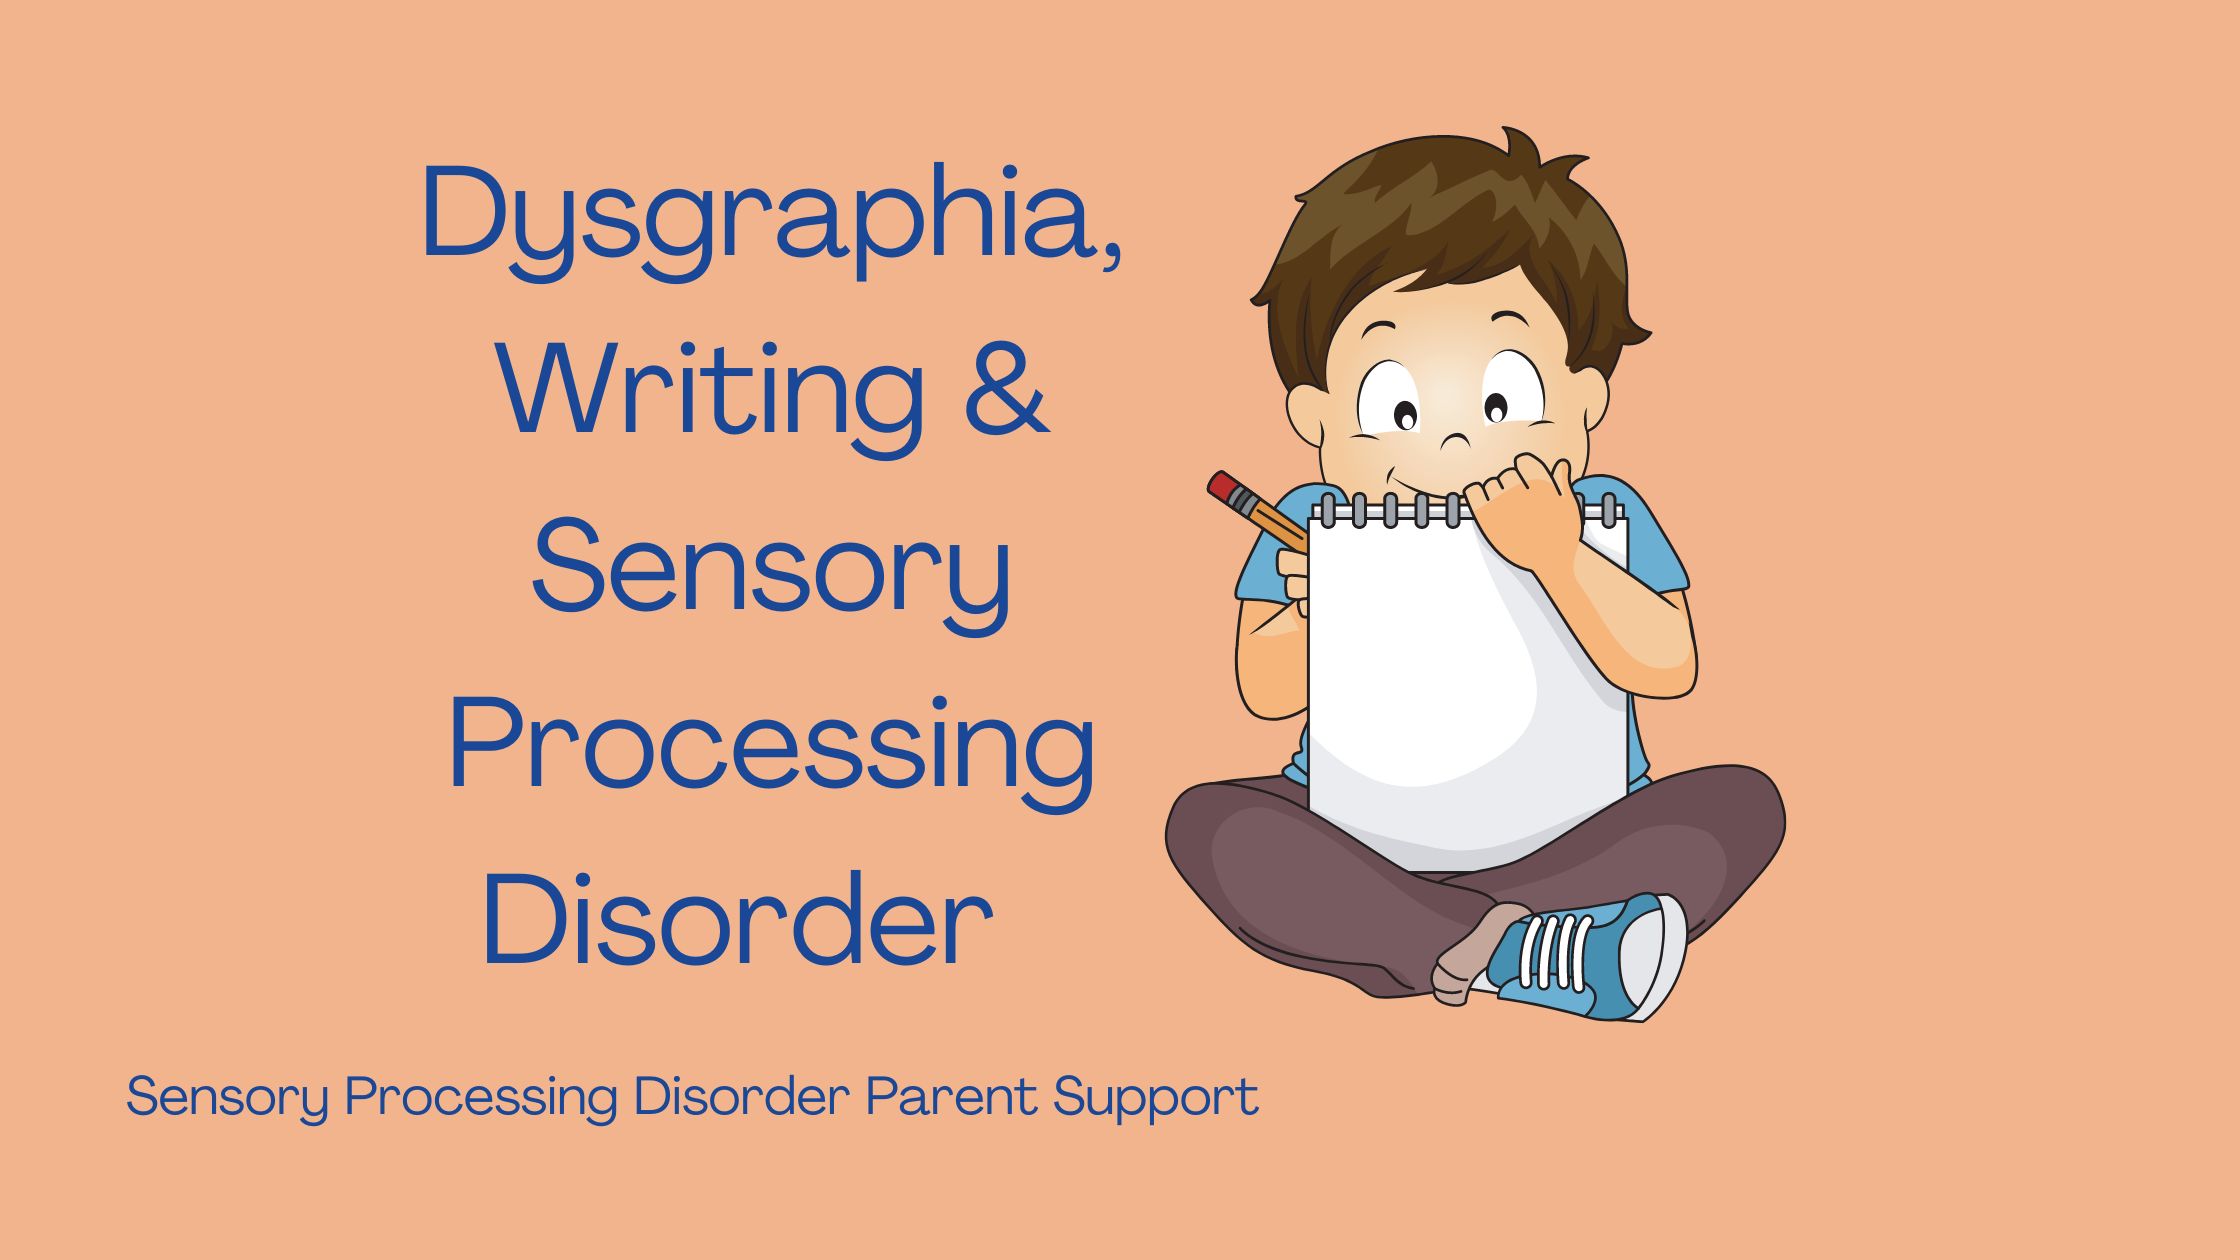 child with sensory processing disorder and dysgraphia writing Dysgraphia, Writing & Sensory Processing Disorder